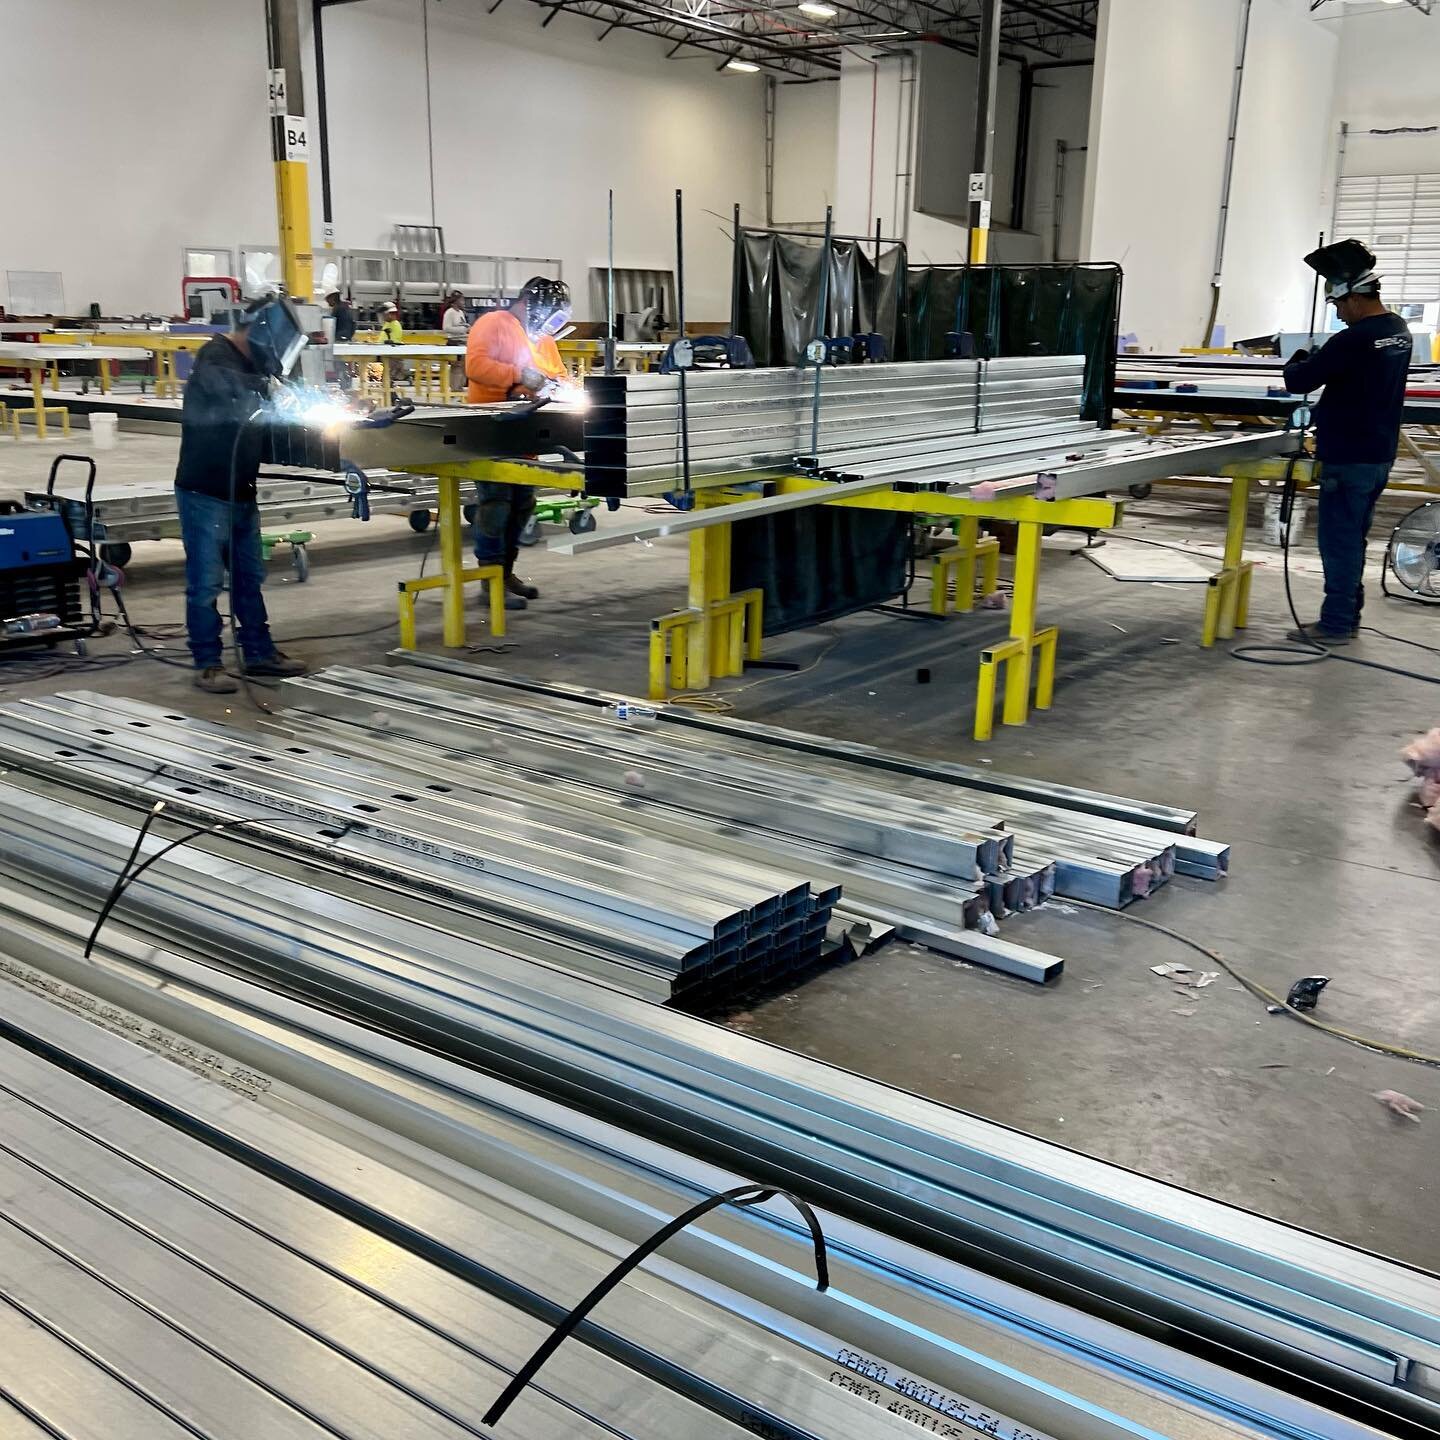 Cold formed steel has the highest strength to weight ratio of any common structural building material.

CFS is strong and light. The opportunities in this space are unmatched. Ready to convert to steel? Reach out to our team to find out where to star